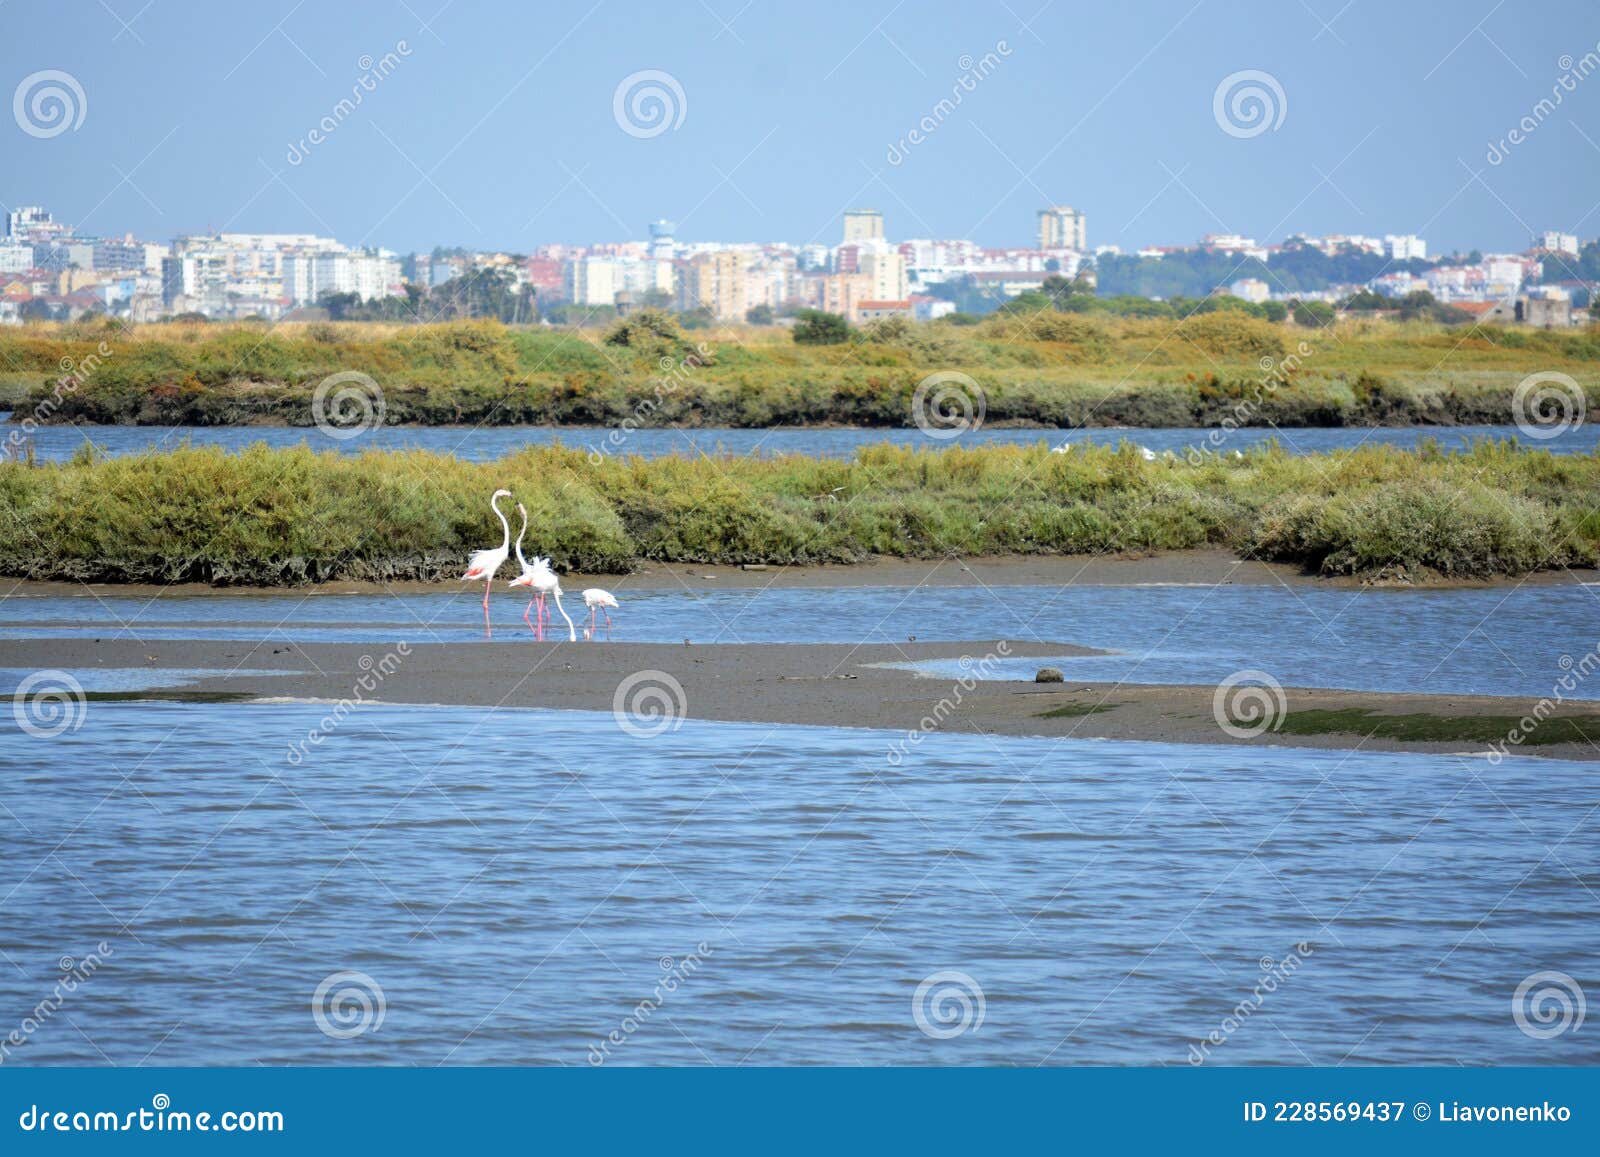 beautiful portugal. flamingo birds eating in the seixal corrois almada water park. wild birds in the city. save wild nature.